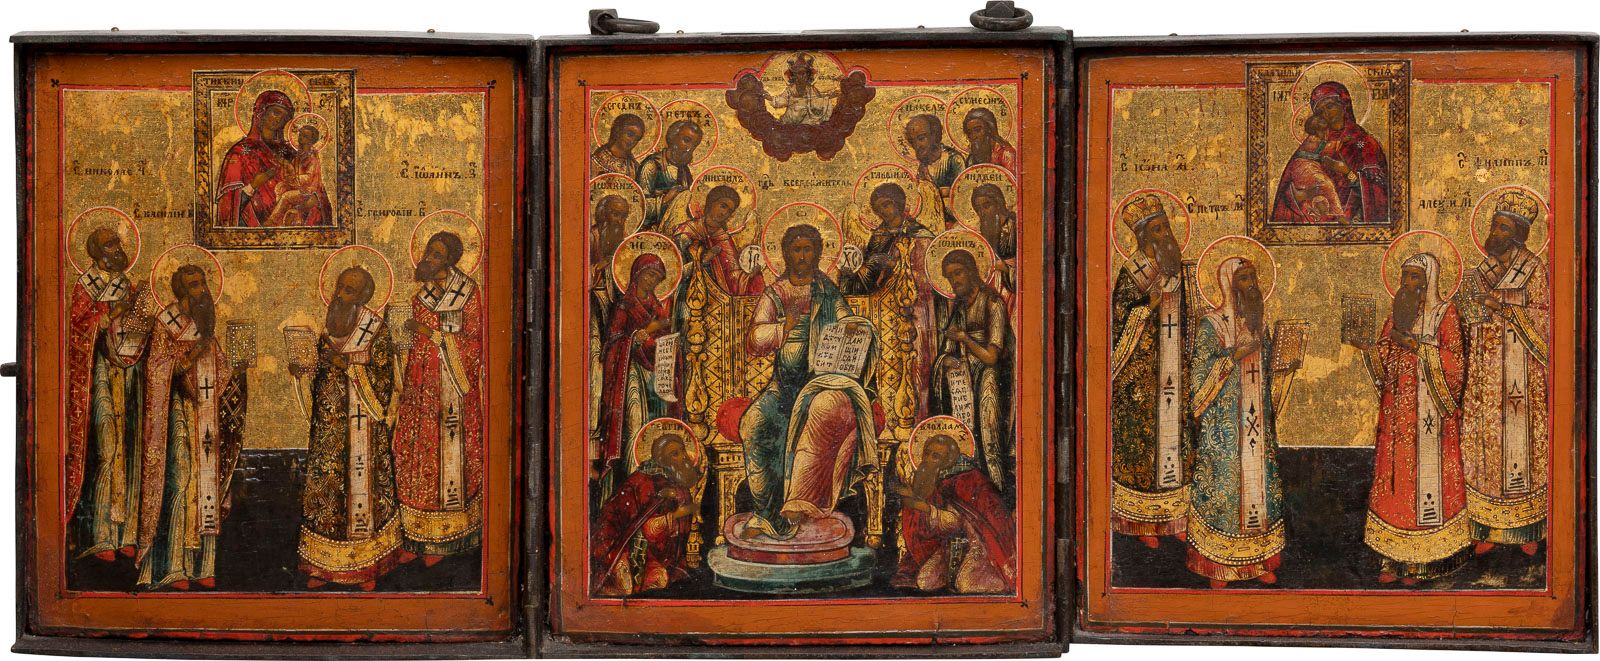 A LARGE TRIPTYCH SHOWING THE EXTENDED DEISIS, IMAGES OF THE GROSSES TRIPTYCH MIT&hellip;